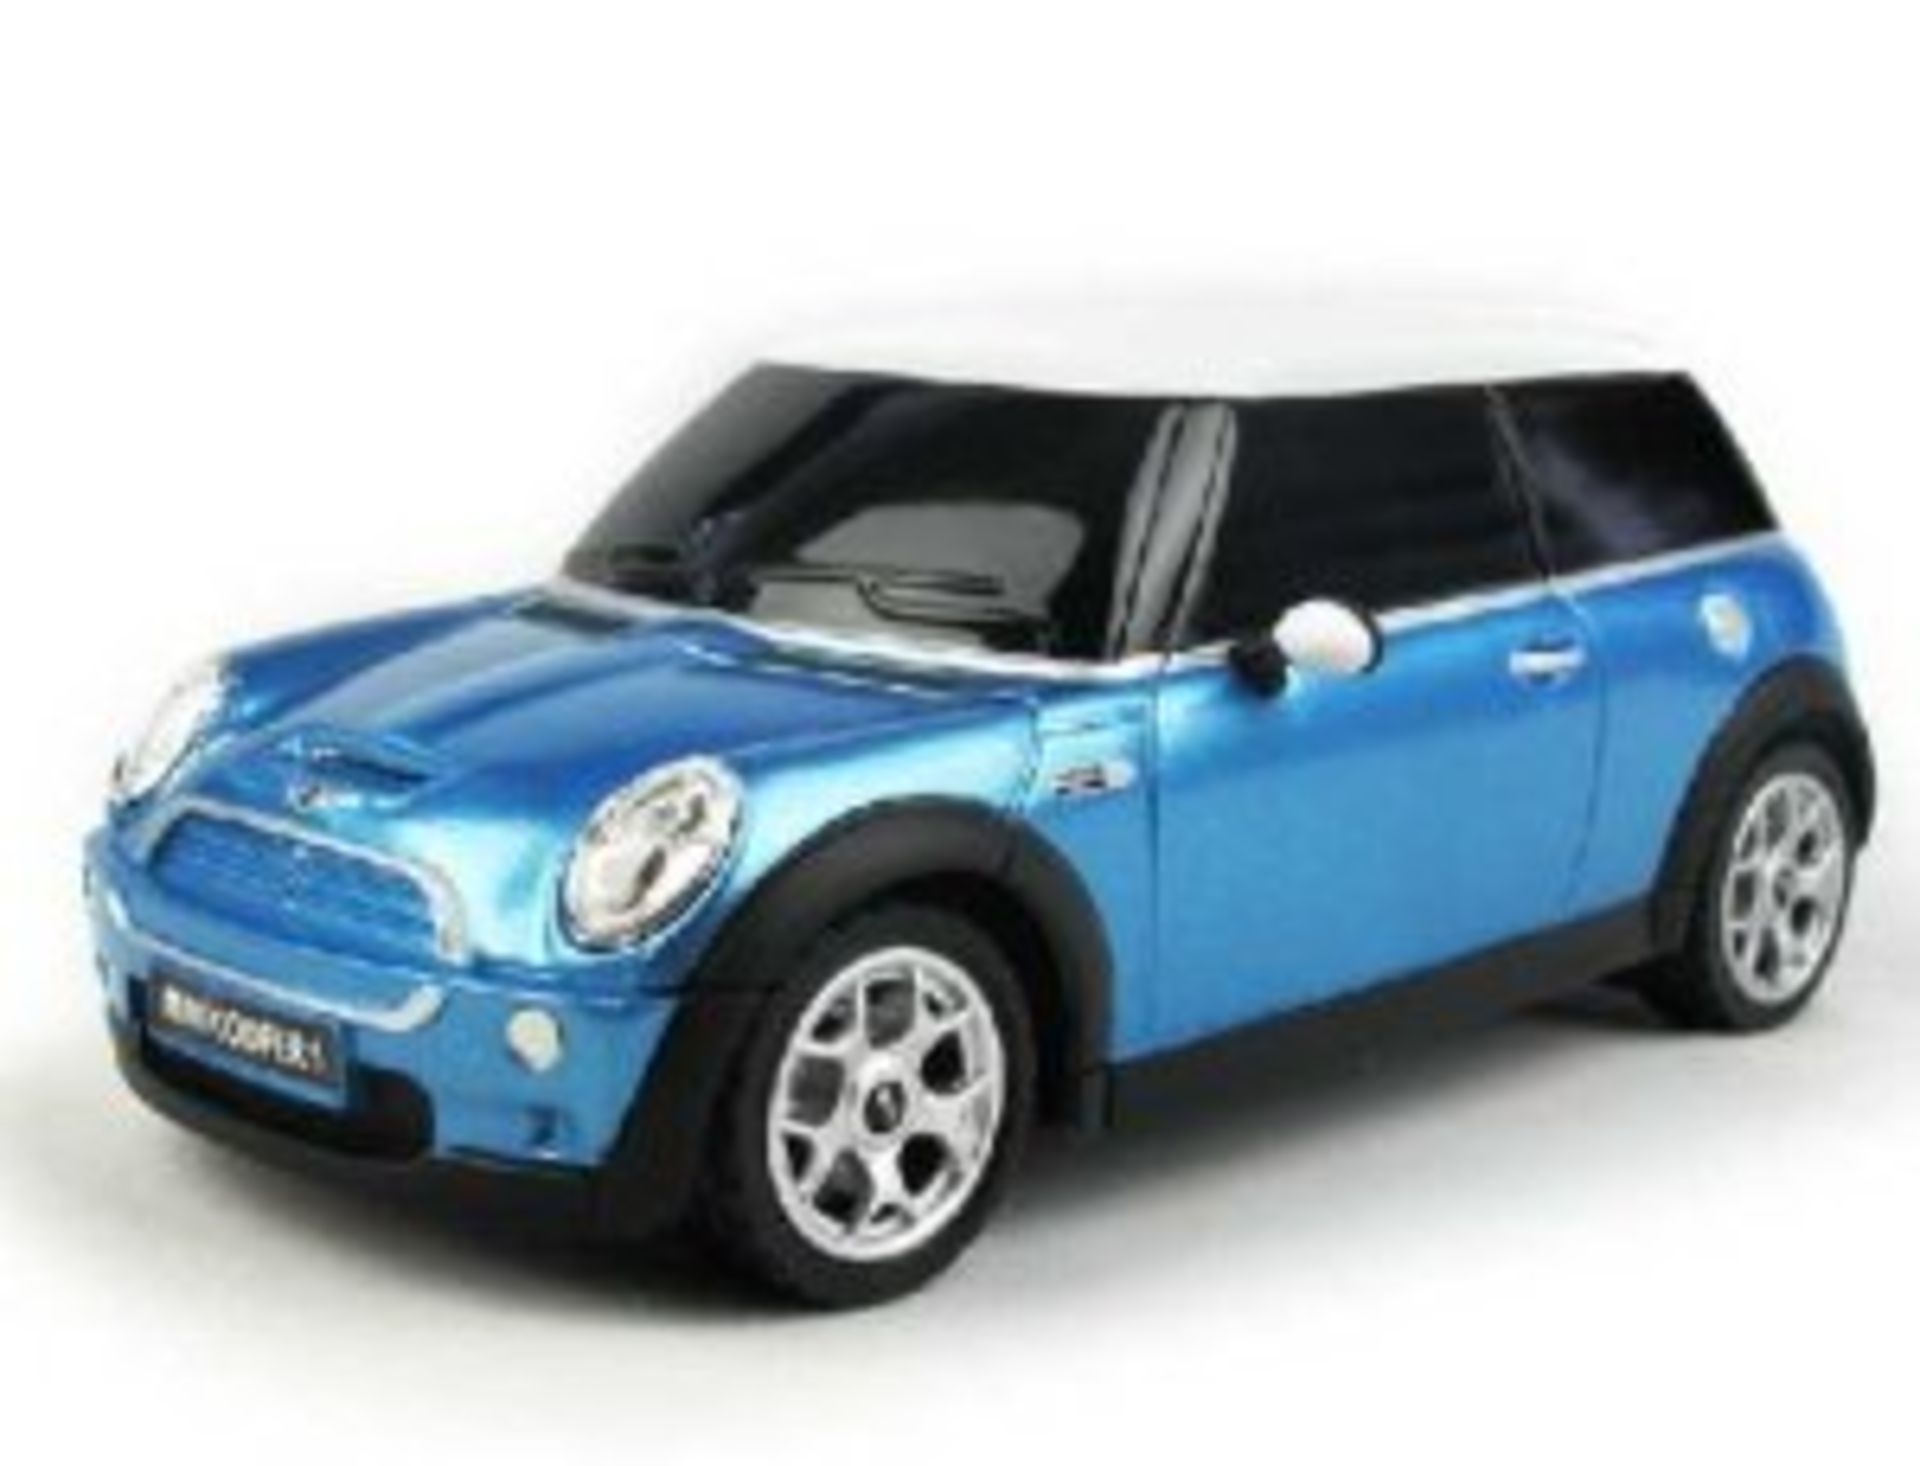 V Brand New 1/24 RC Mini Cooper S Full Function Remote Control Car - Official Merchandise - Image 2 of 2